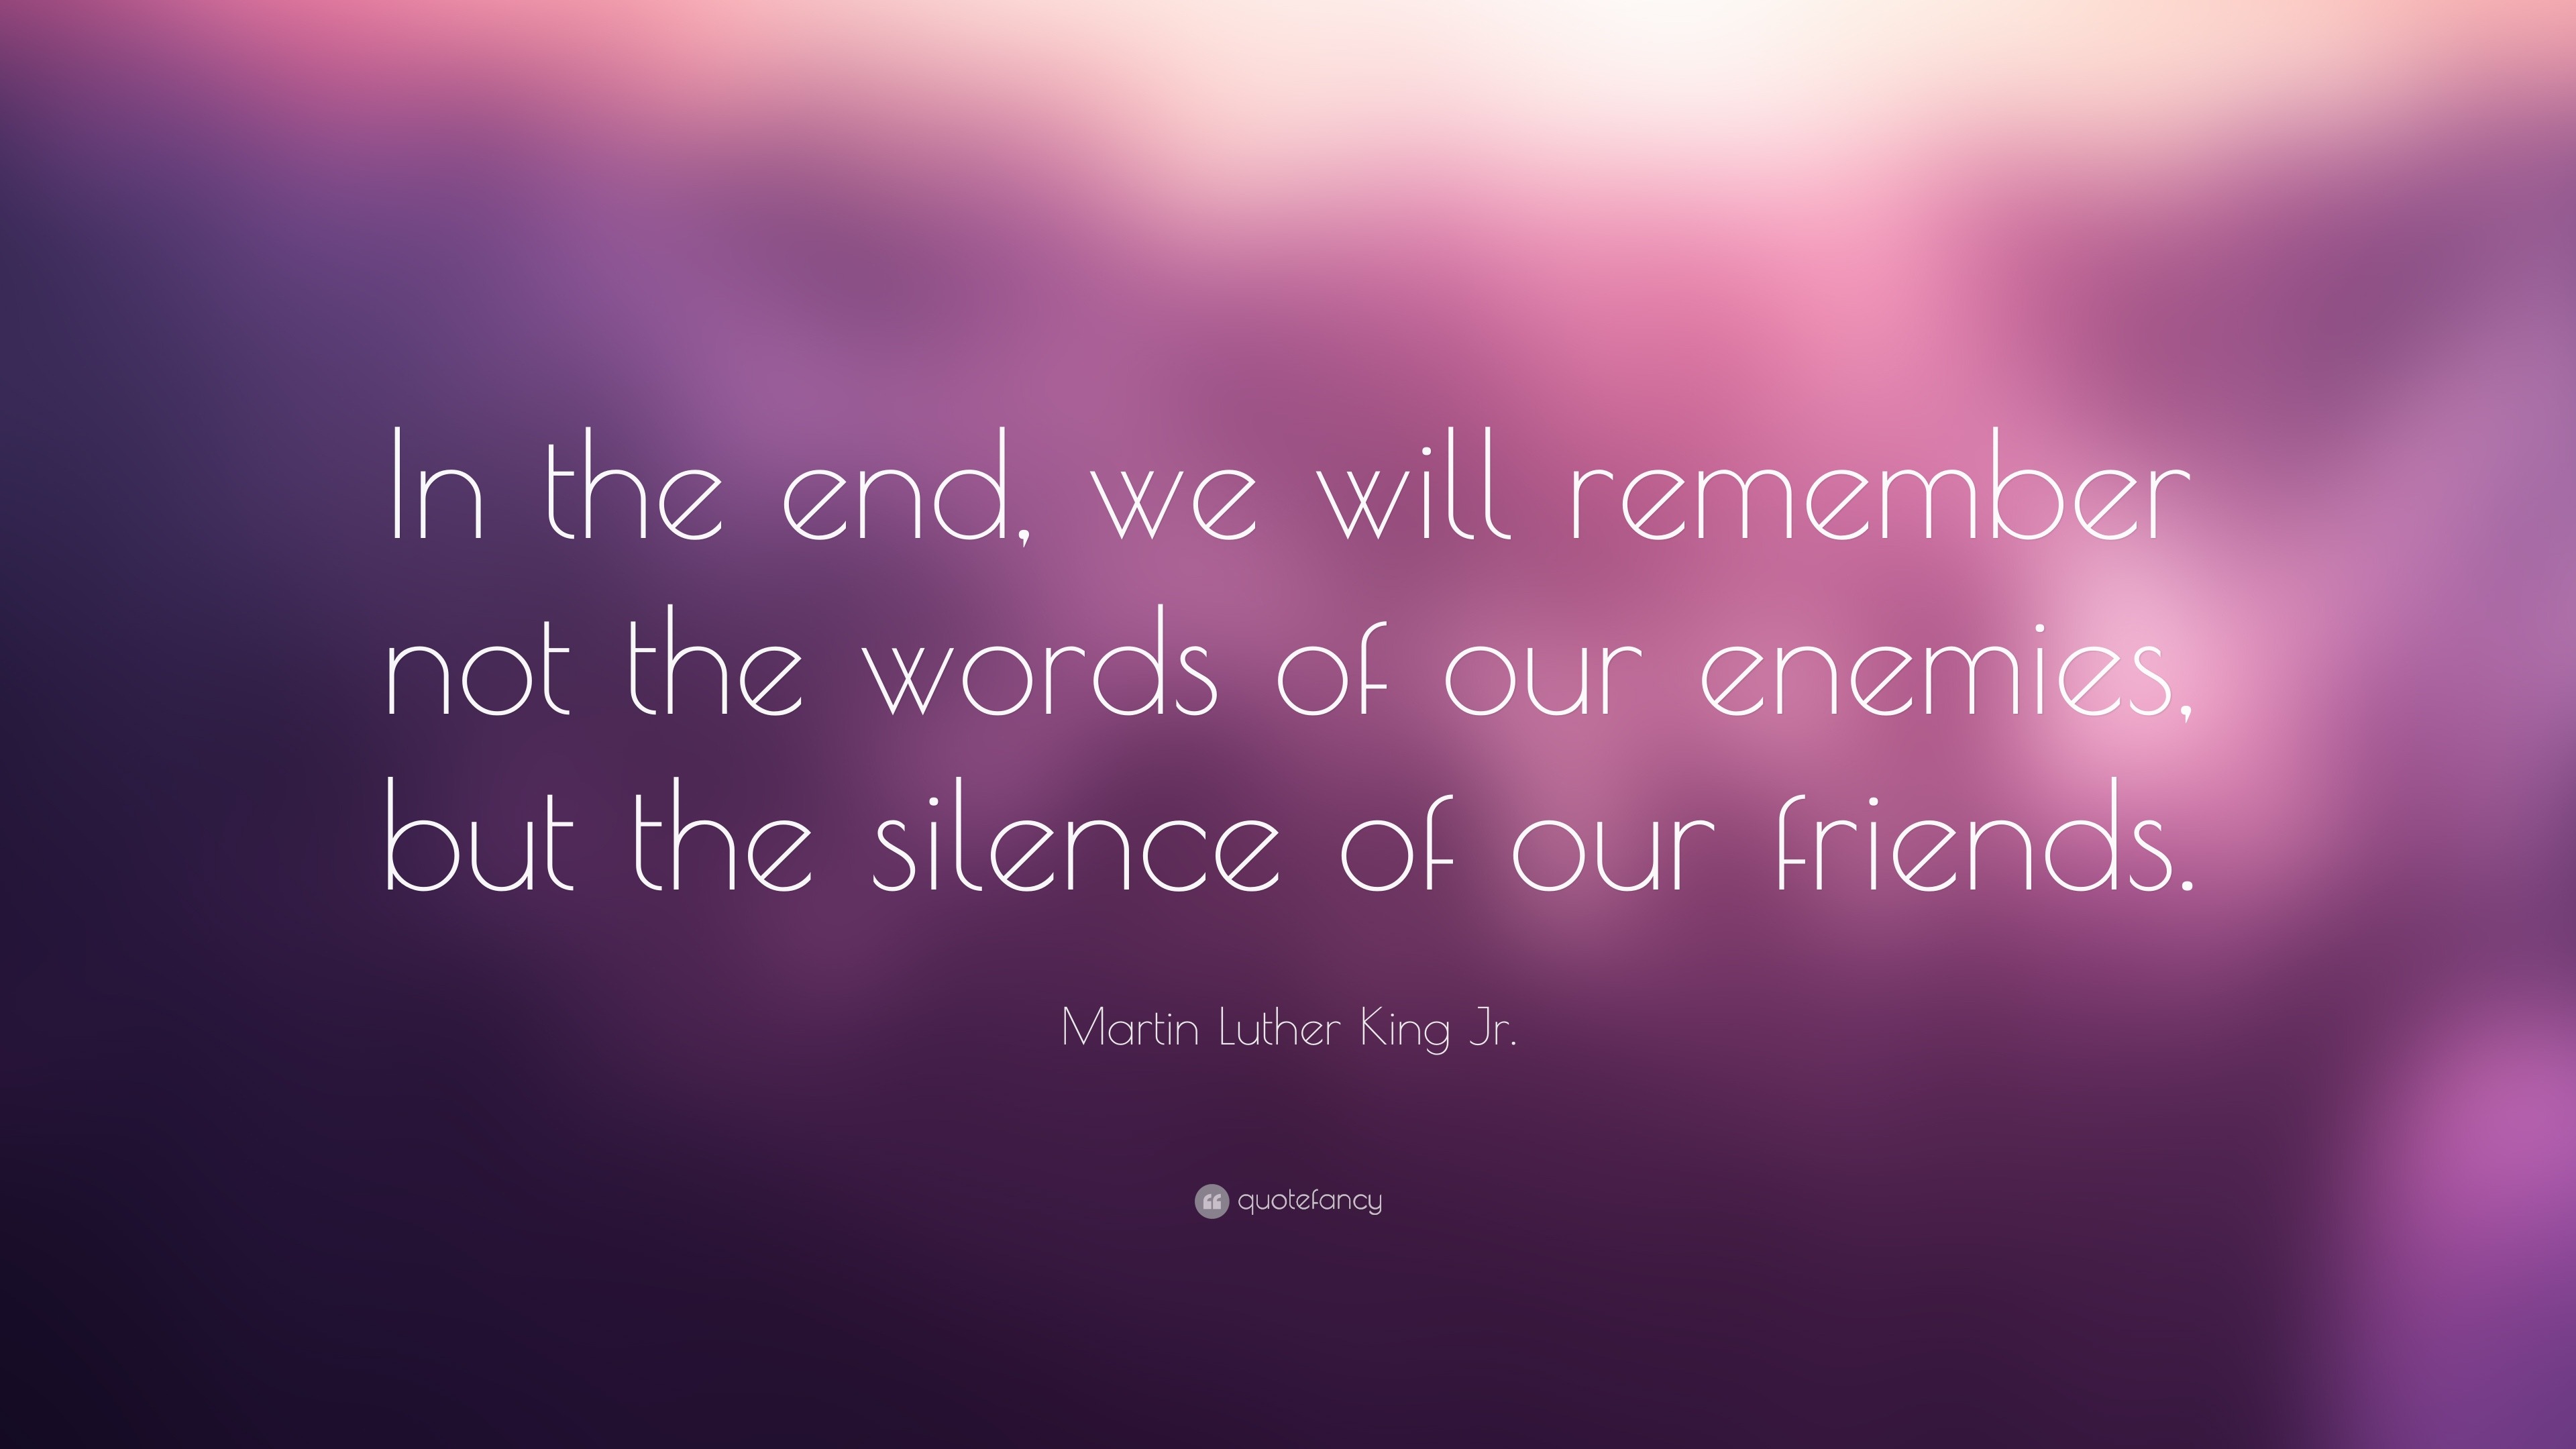 Martin Luther King Jr. Quote: “In the end, we will remember not the